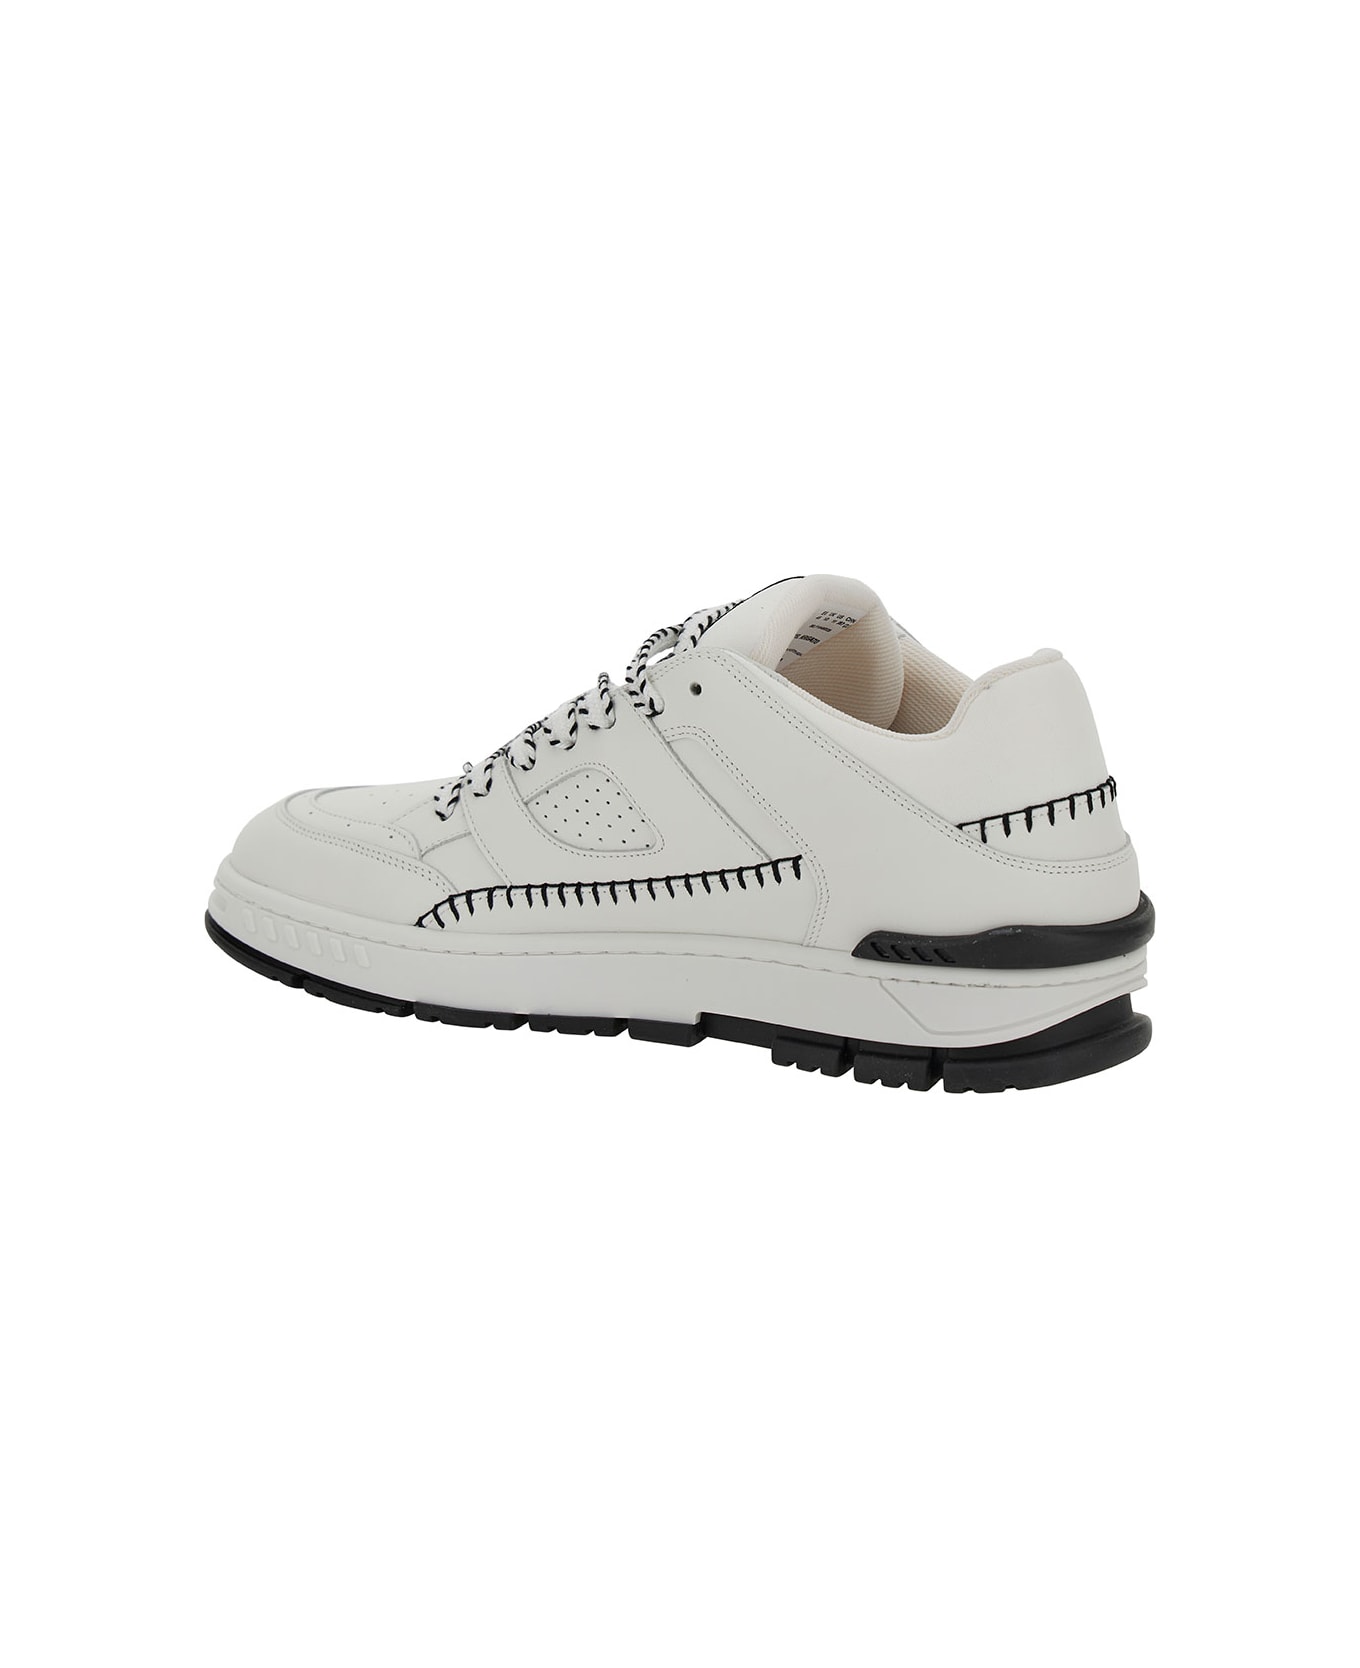 Axel Arigato 'area Lo Sneaker Stitch' White Low Top Sneakers With Contrasting Stitch Detail In Leather Man - White スニーカー